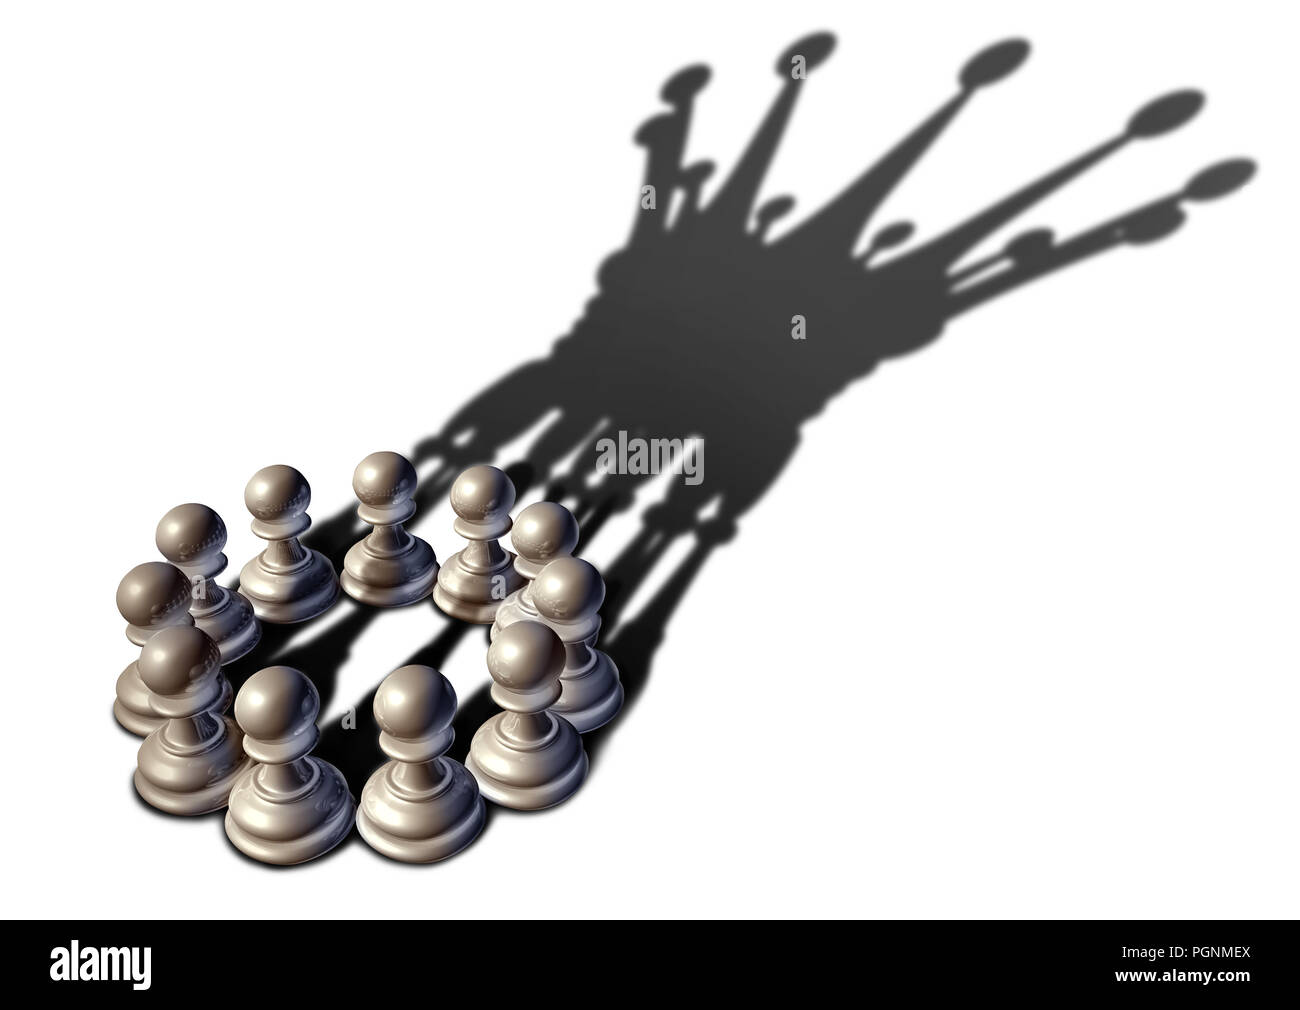 Concept of business leadership as a group of chess pawn pieces gathering together as a team to lead and form a king piece as a 3D illustration. Stock Photo